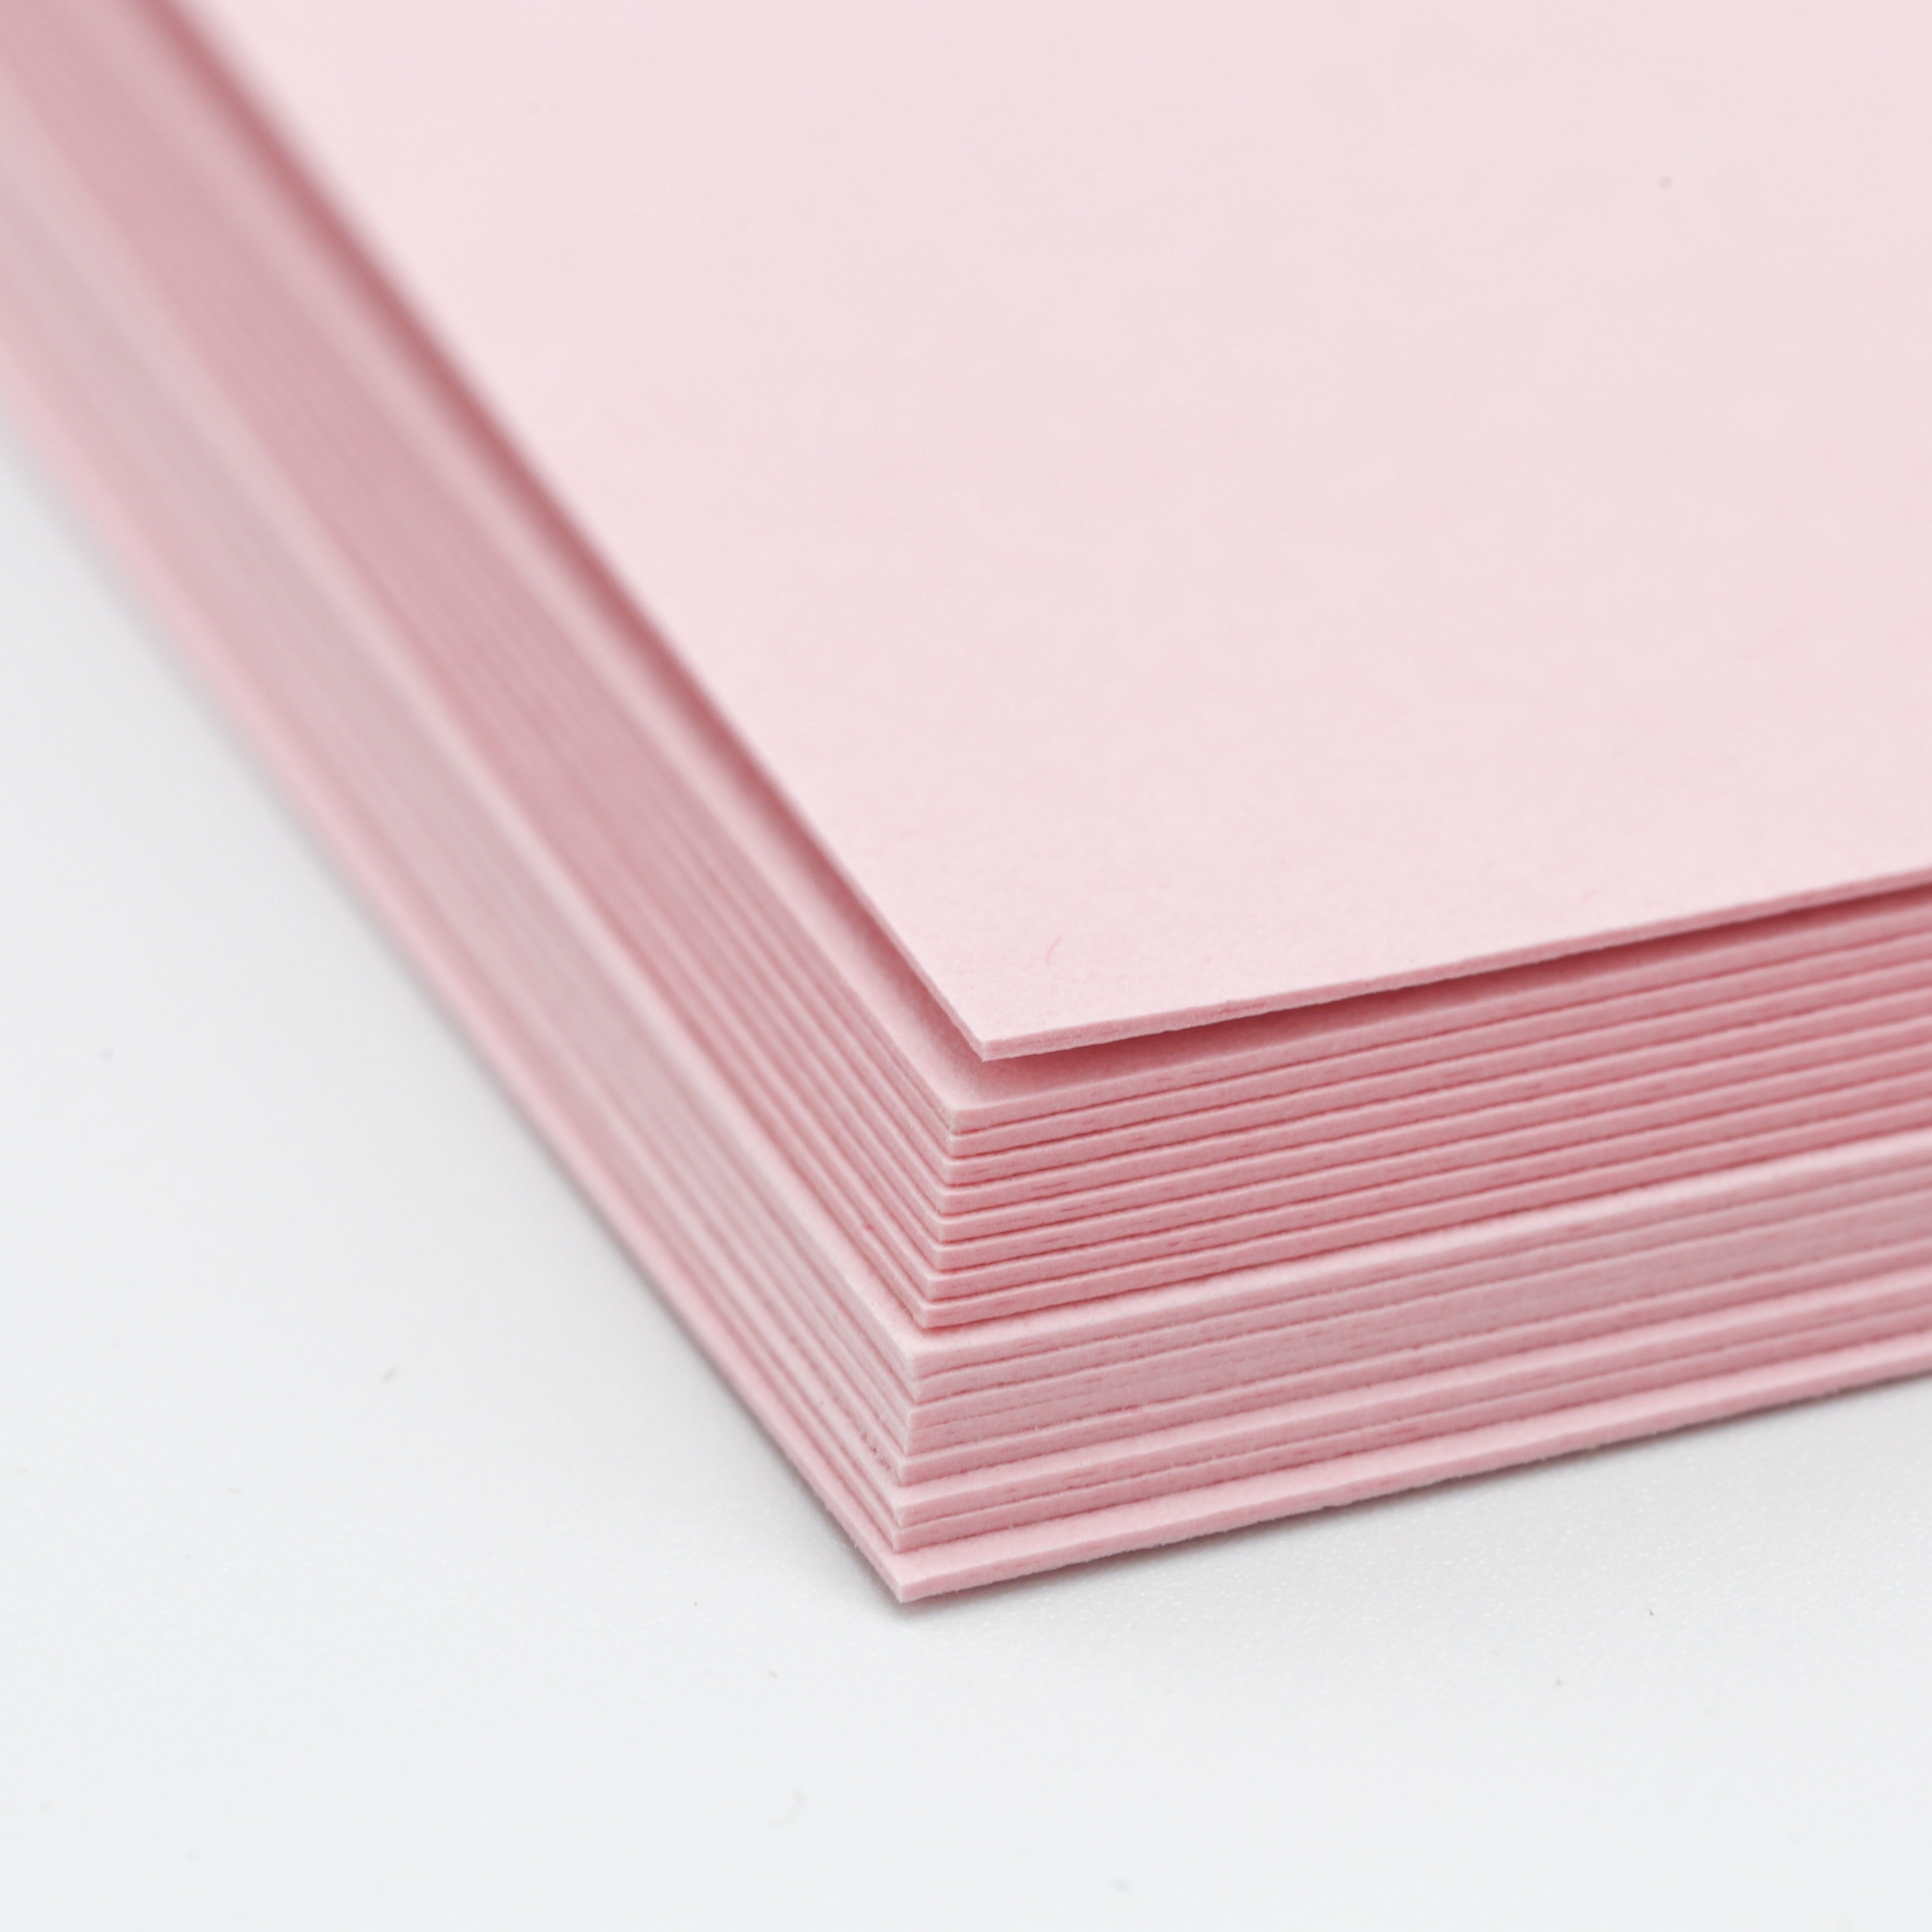 Colorplan Light Cardstock Paper - BRIGHT RED